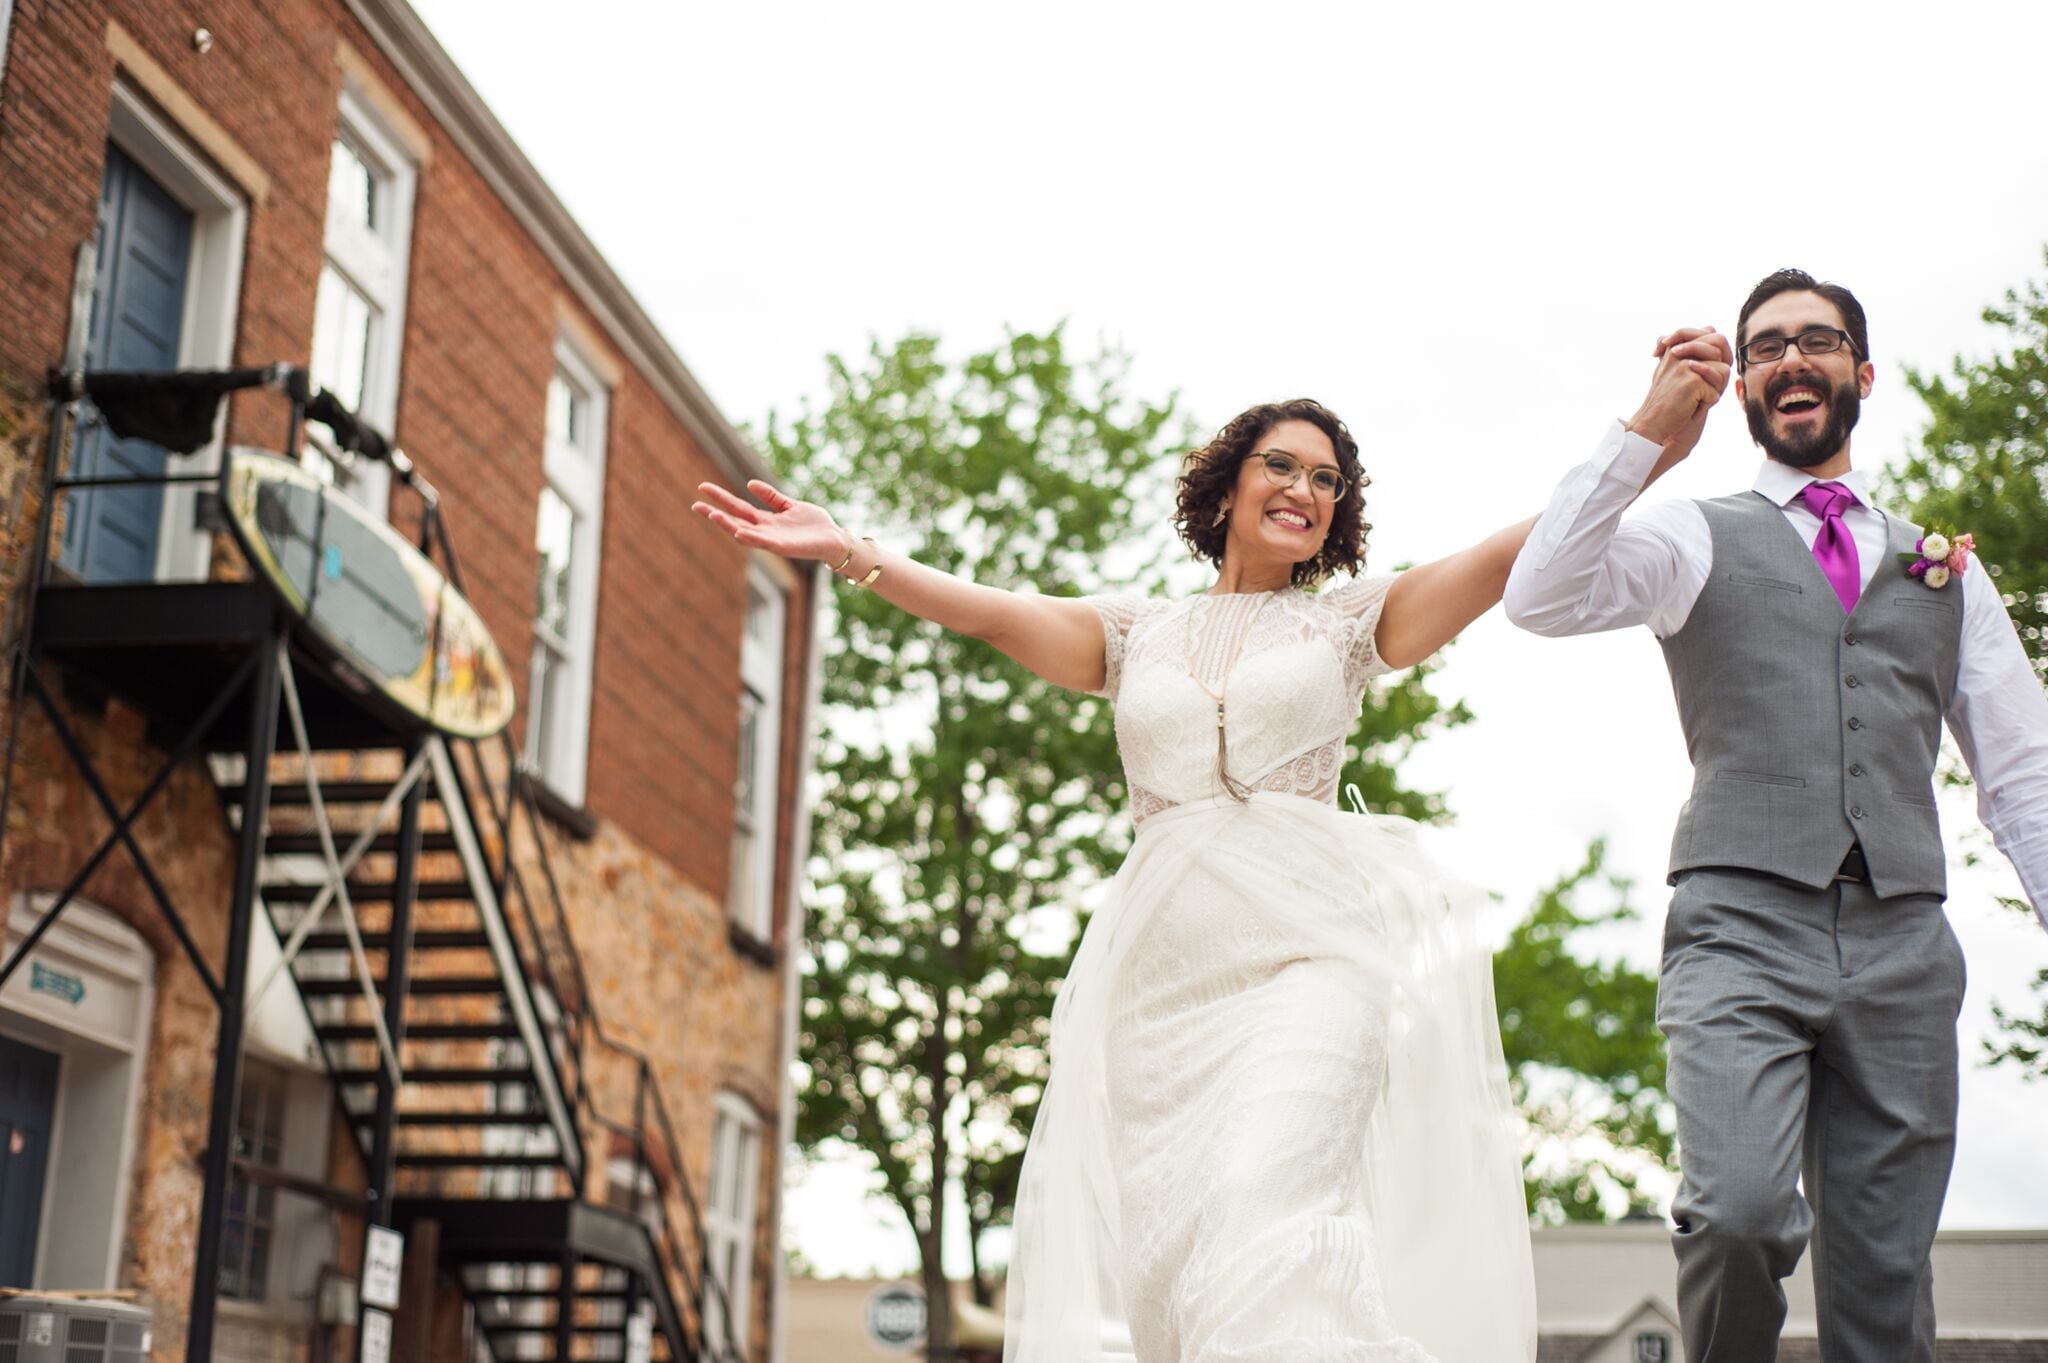 A couple in wedding clothes hold hands and raise them victoriously as they happily parade down the street